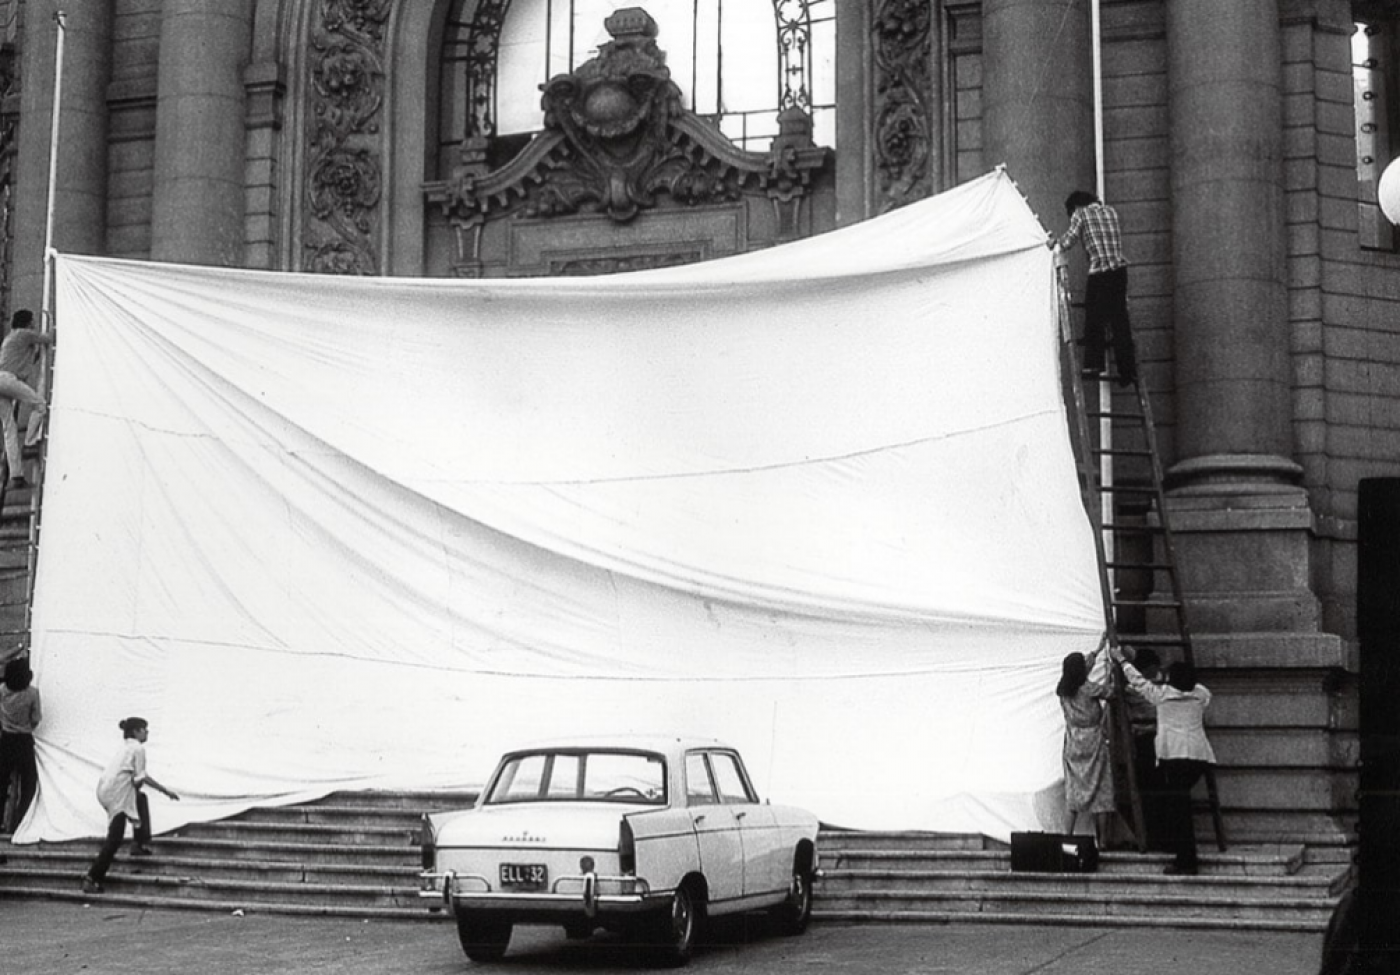 Black and white photograph of a people installing a large white sheet over a large building entrance.